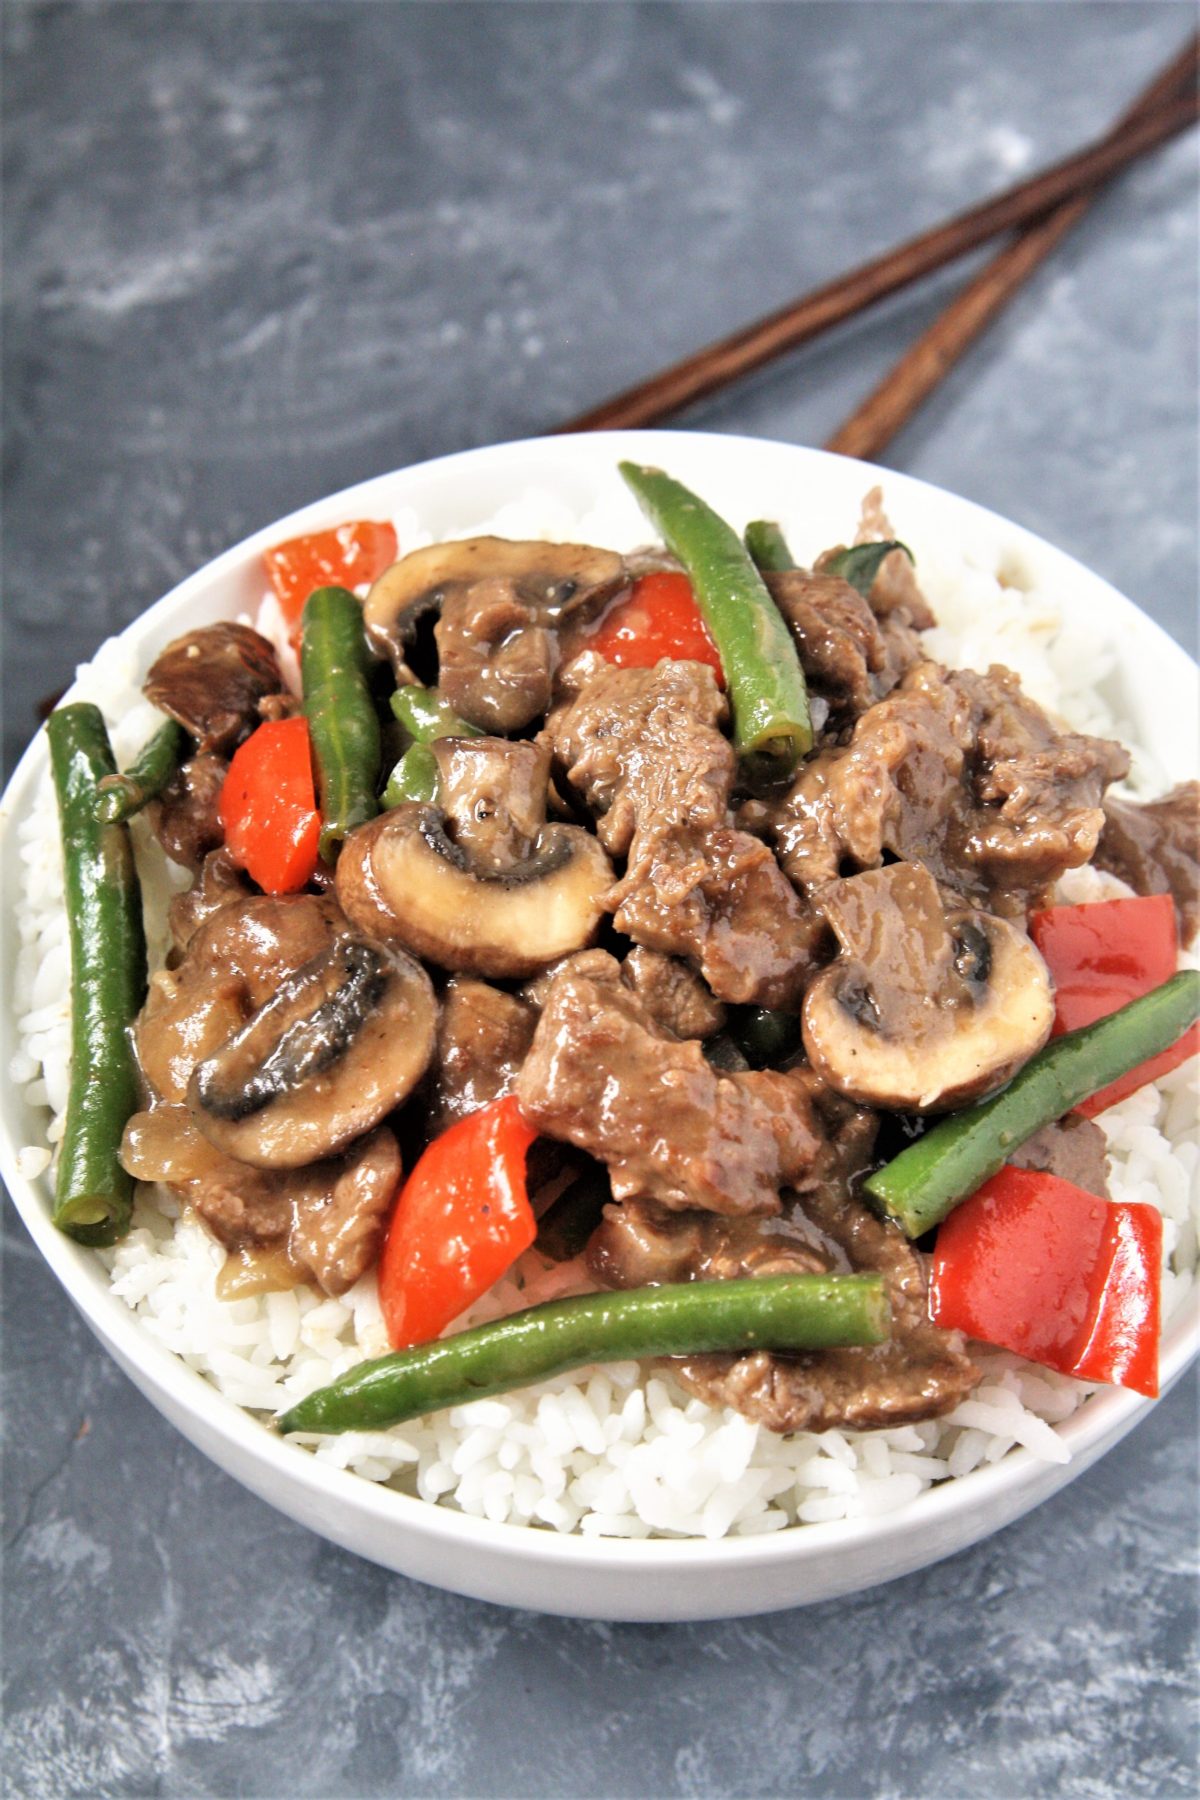 Made in one skillet with big, bold flavors, this Panda Express Copycat Black Pepper Angus Steak recipe is easy and delicious. The perfect weeknight dinner that is ready to be enjoyed in 15 minutes